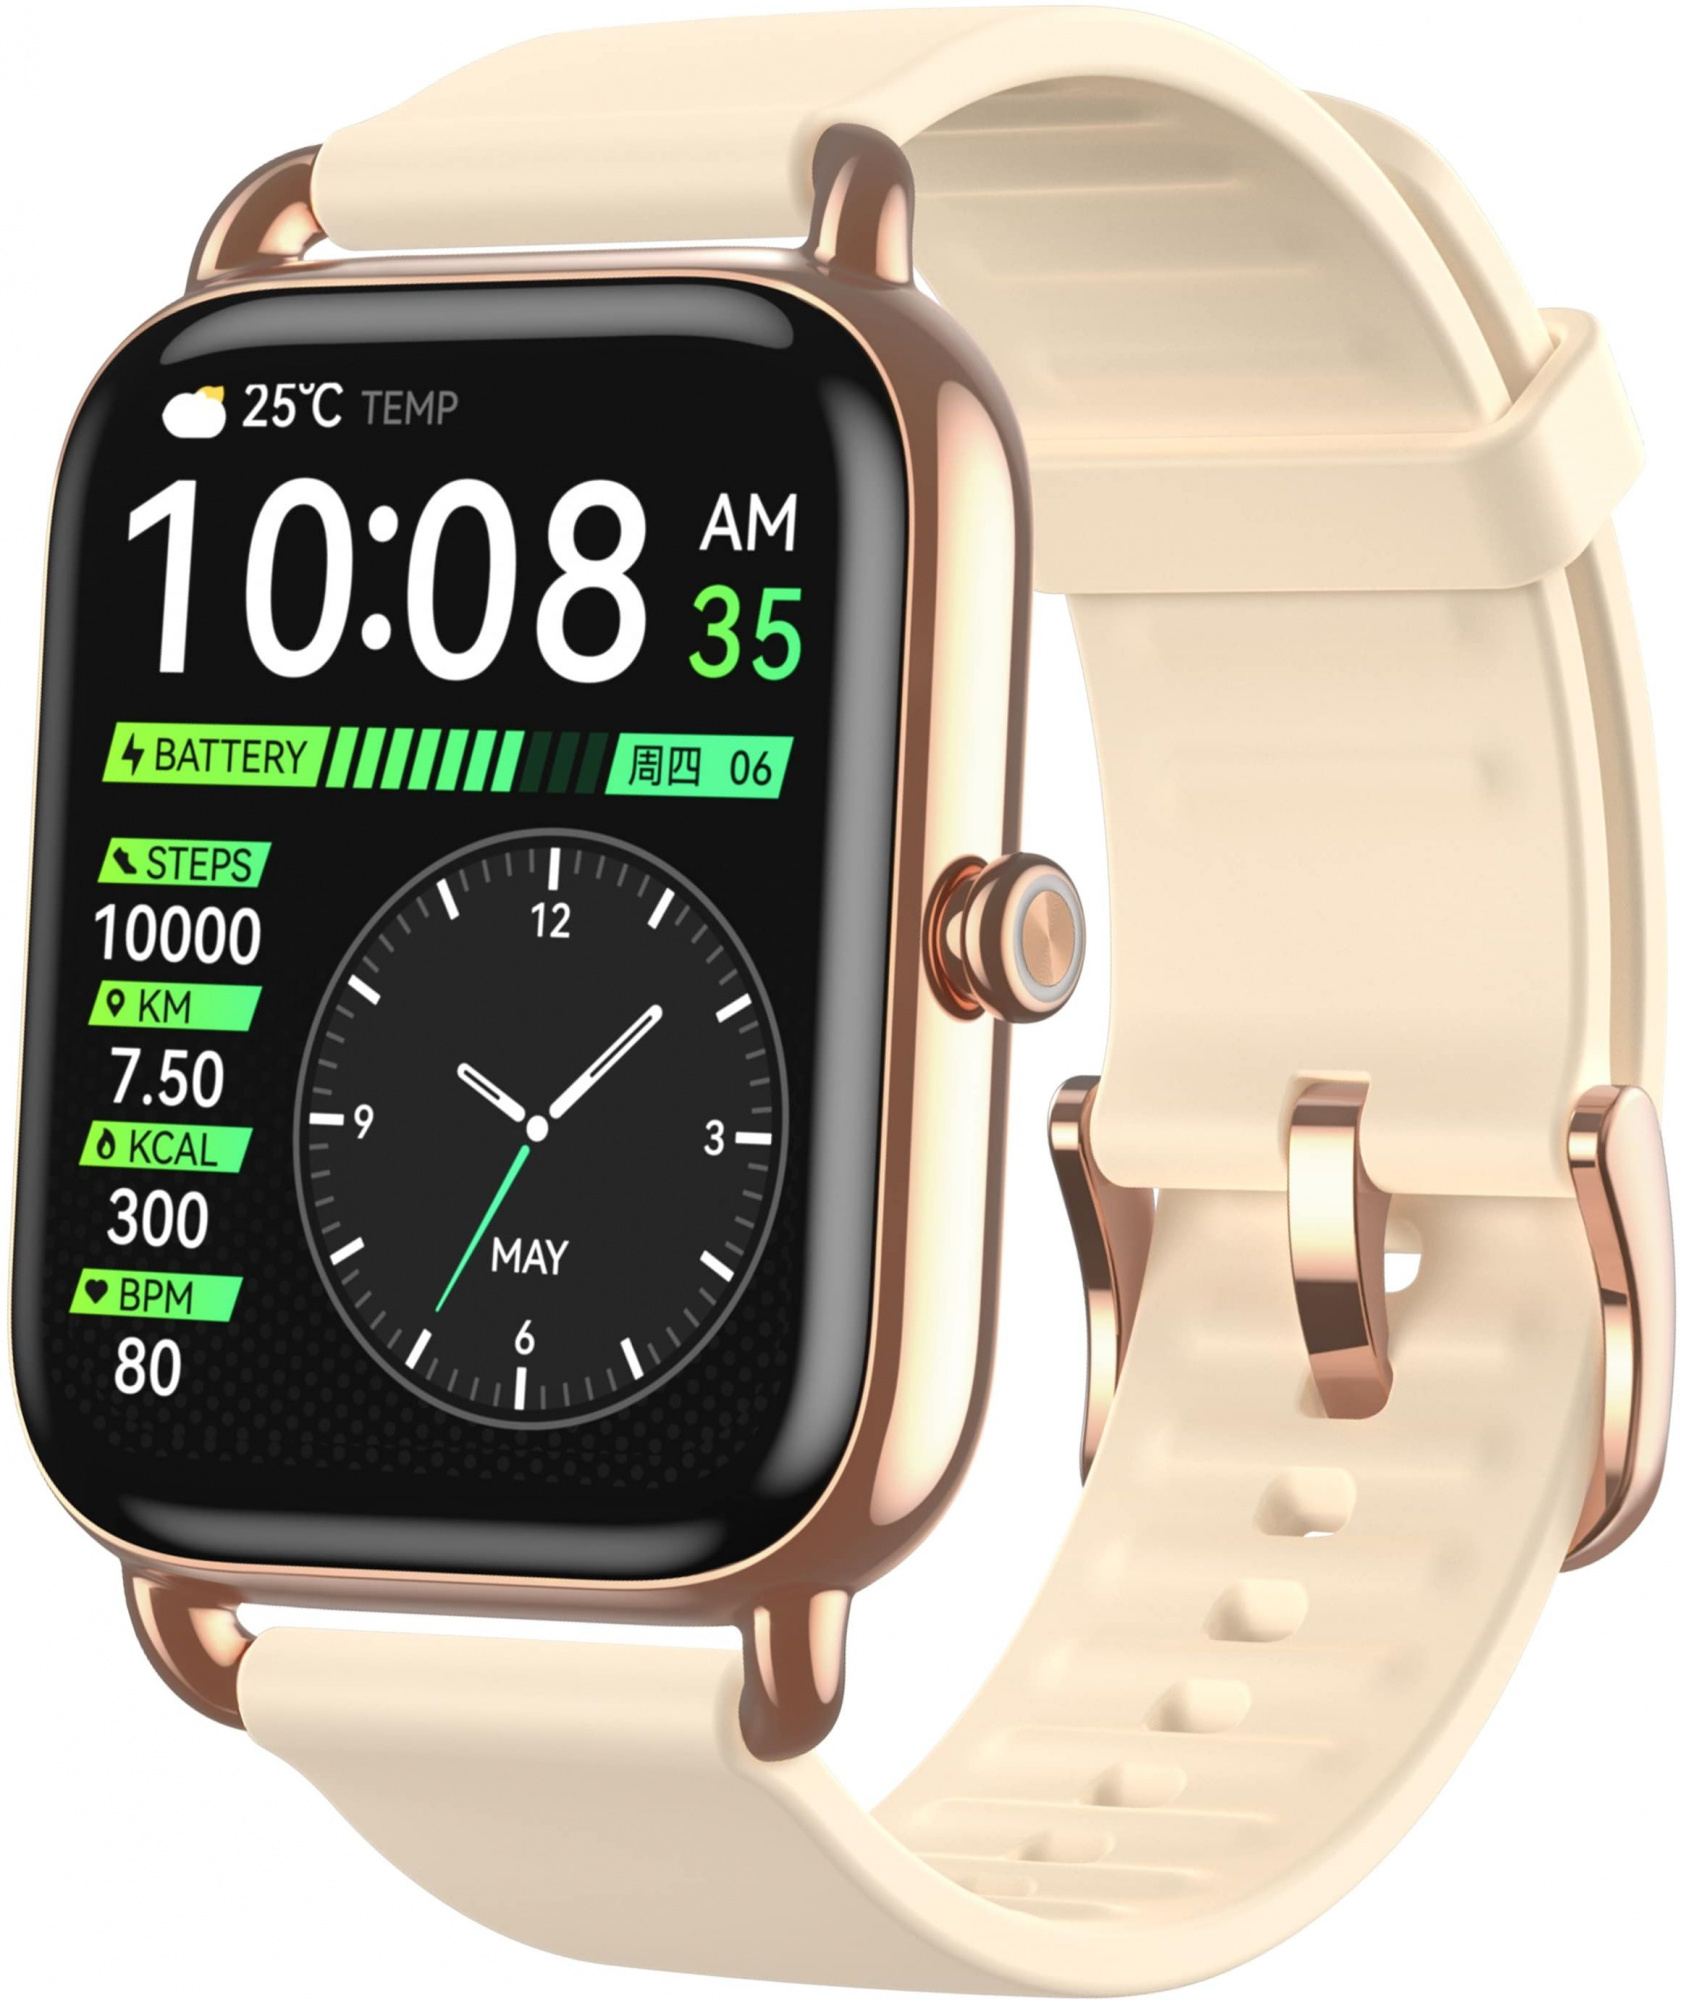 Лс плюс. Смарт часы rs4. Haylou rs4. Haylou Smart watch rs4 Plus Gold. Smart soat Canyon SW-86 cost.